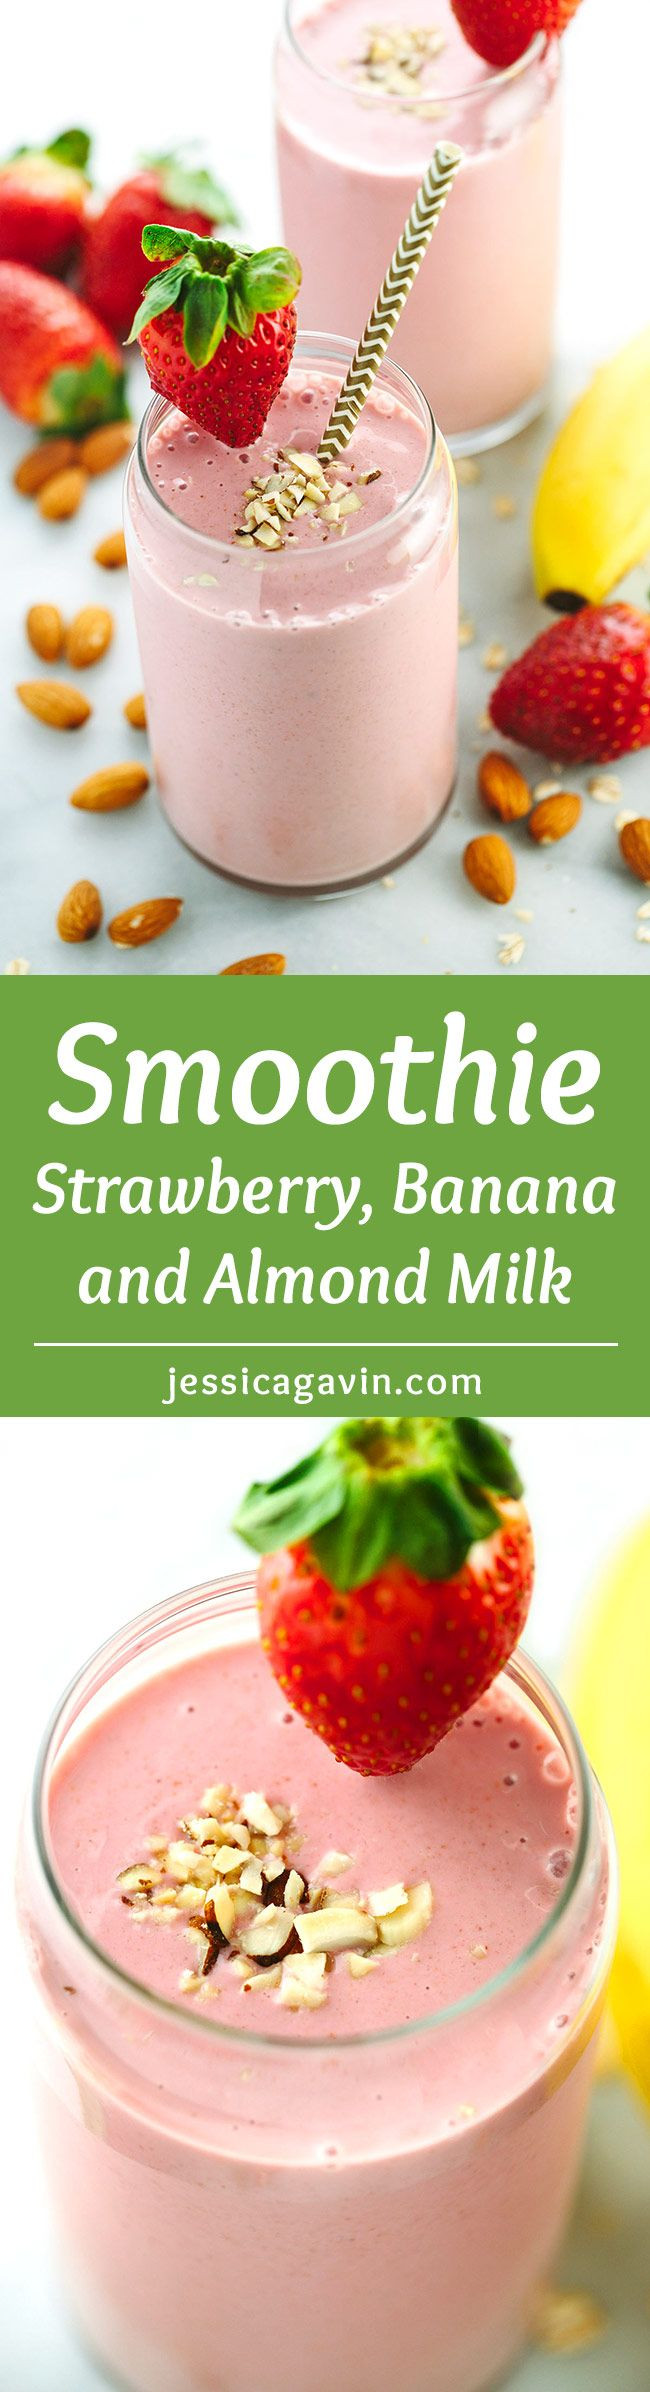 Almond Milk Smoothie Recipes Healthy
 25 best ideas about Fruit and ve able smoothie on